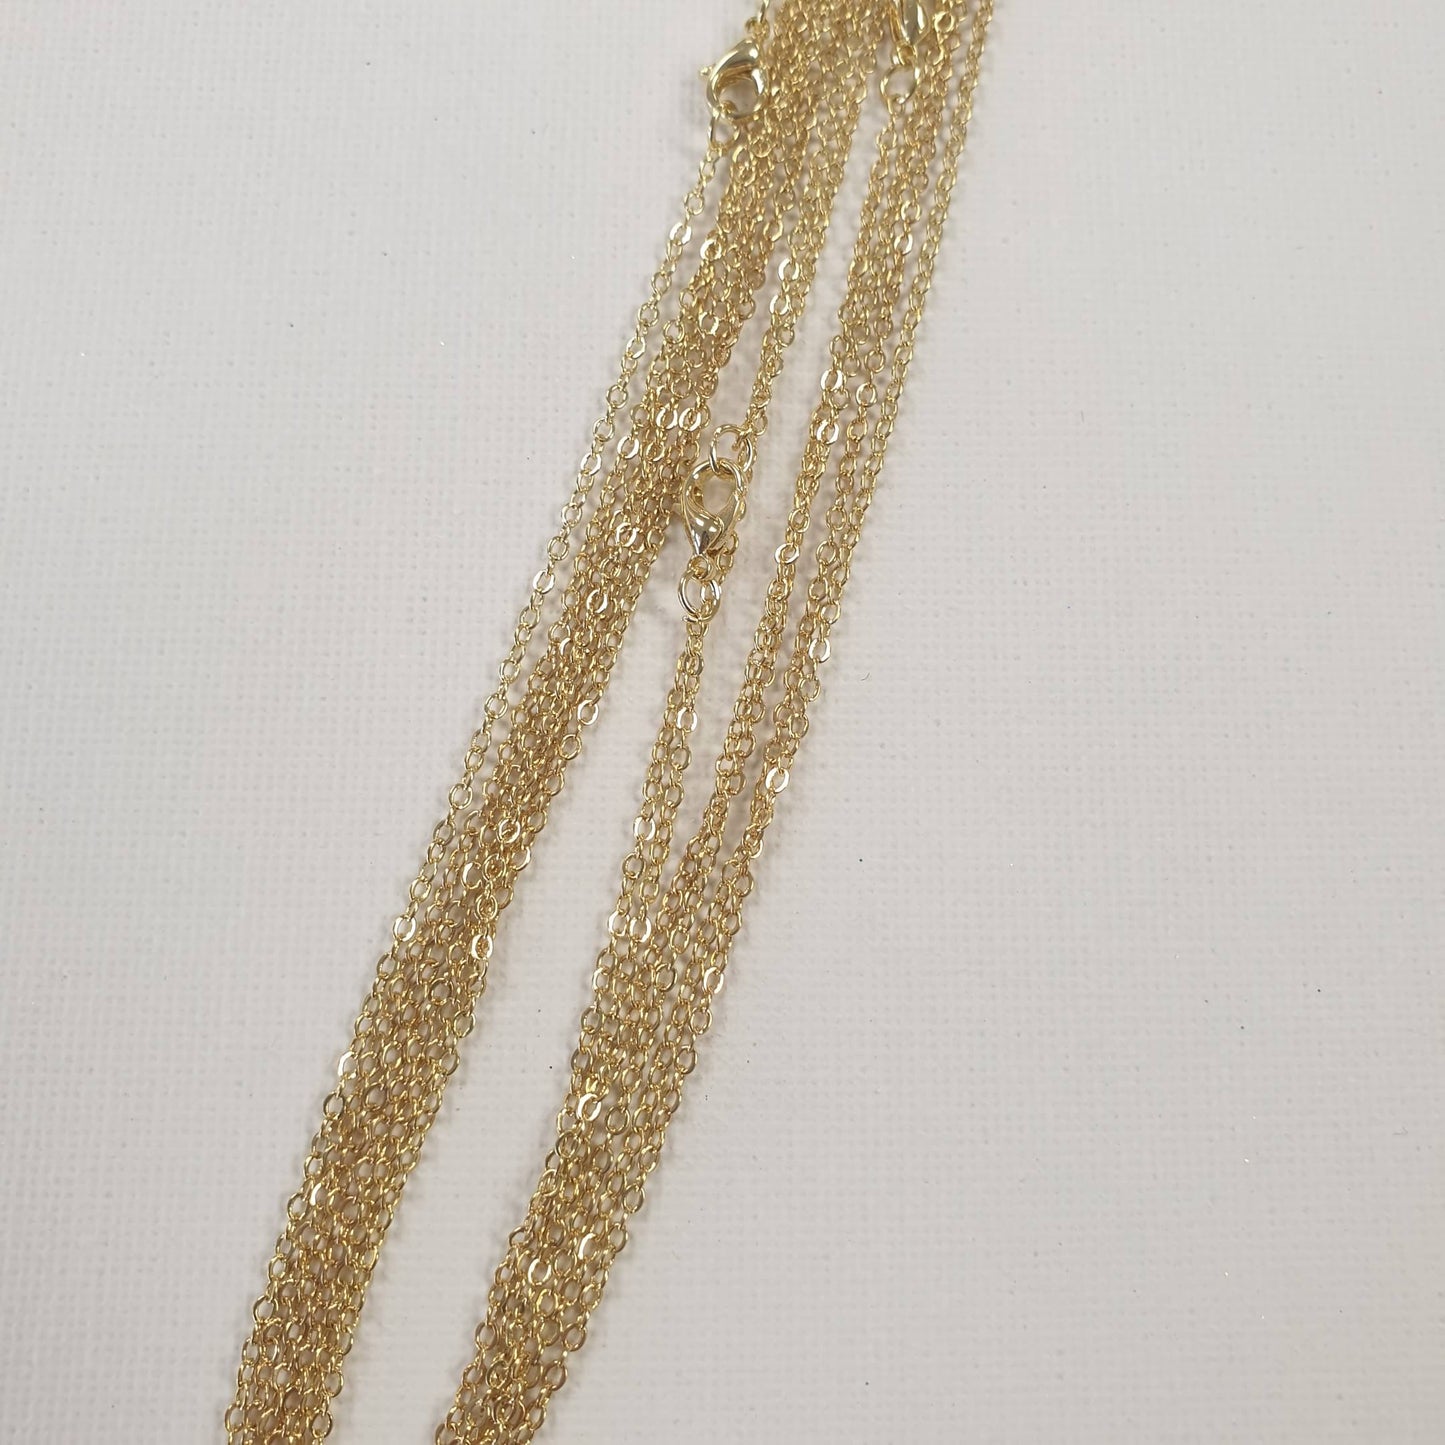 Set of 5 Soft Gold Plated Fine Trace Chains - 18"